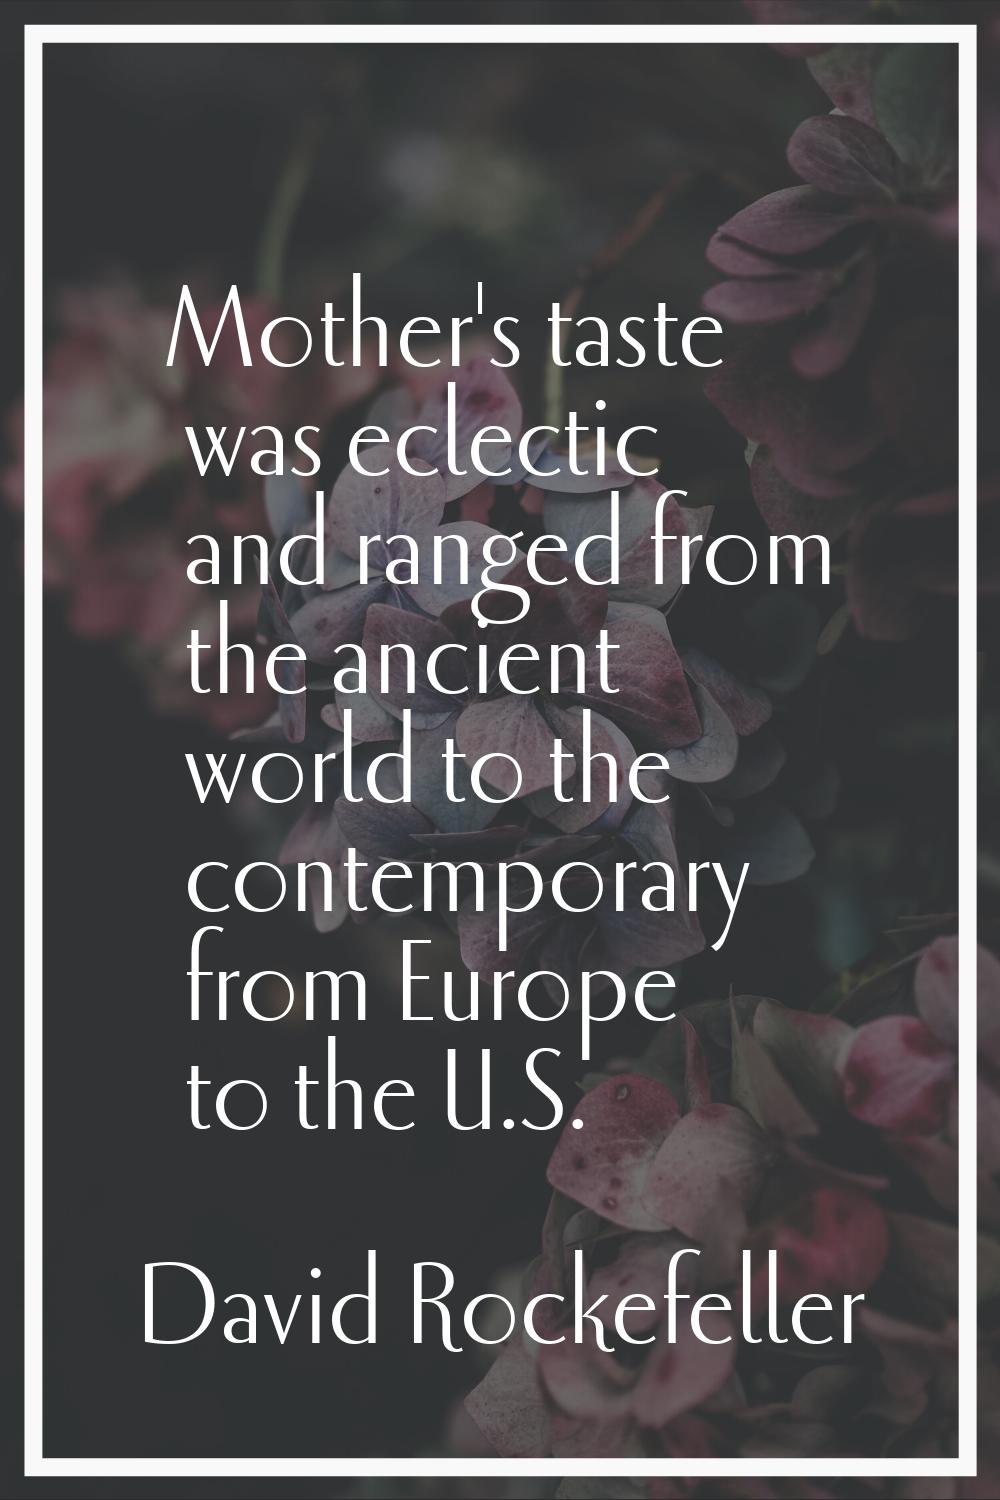 Mother's taste was eclectic and ranged from the ancient world to the contemporary from Europe to th